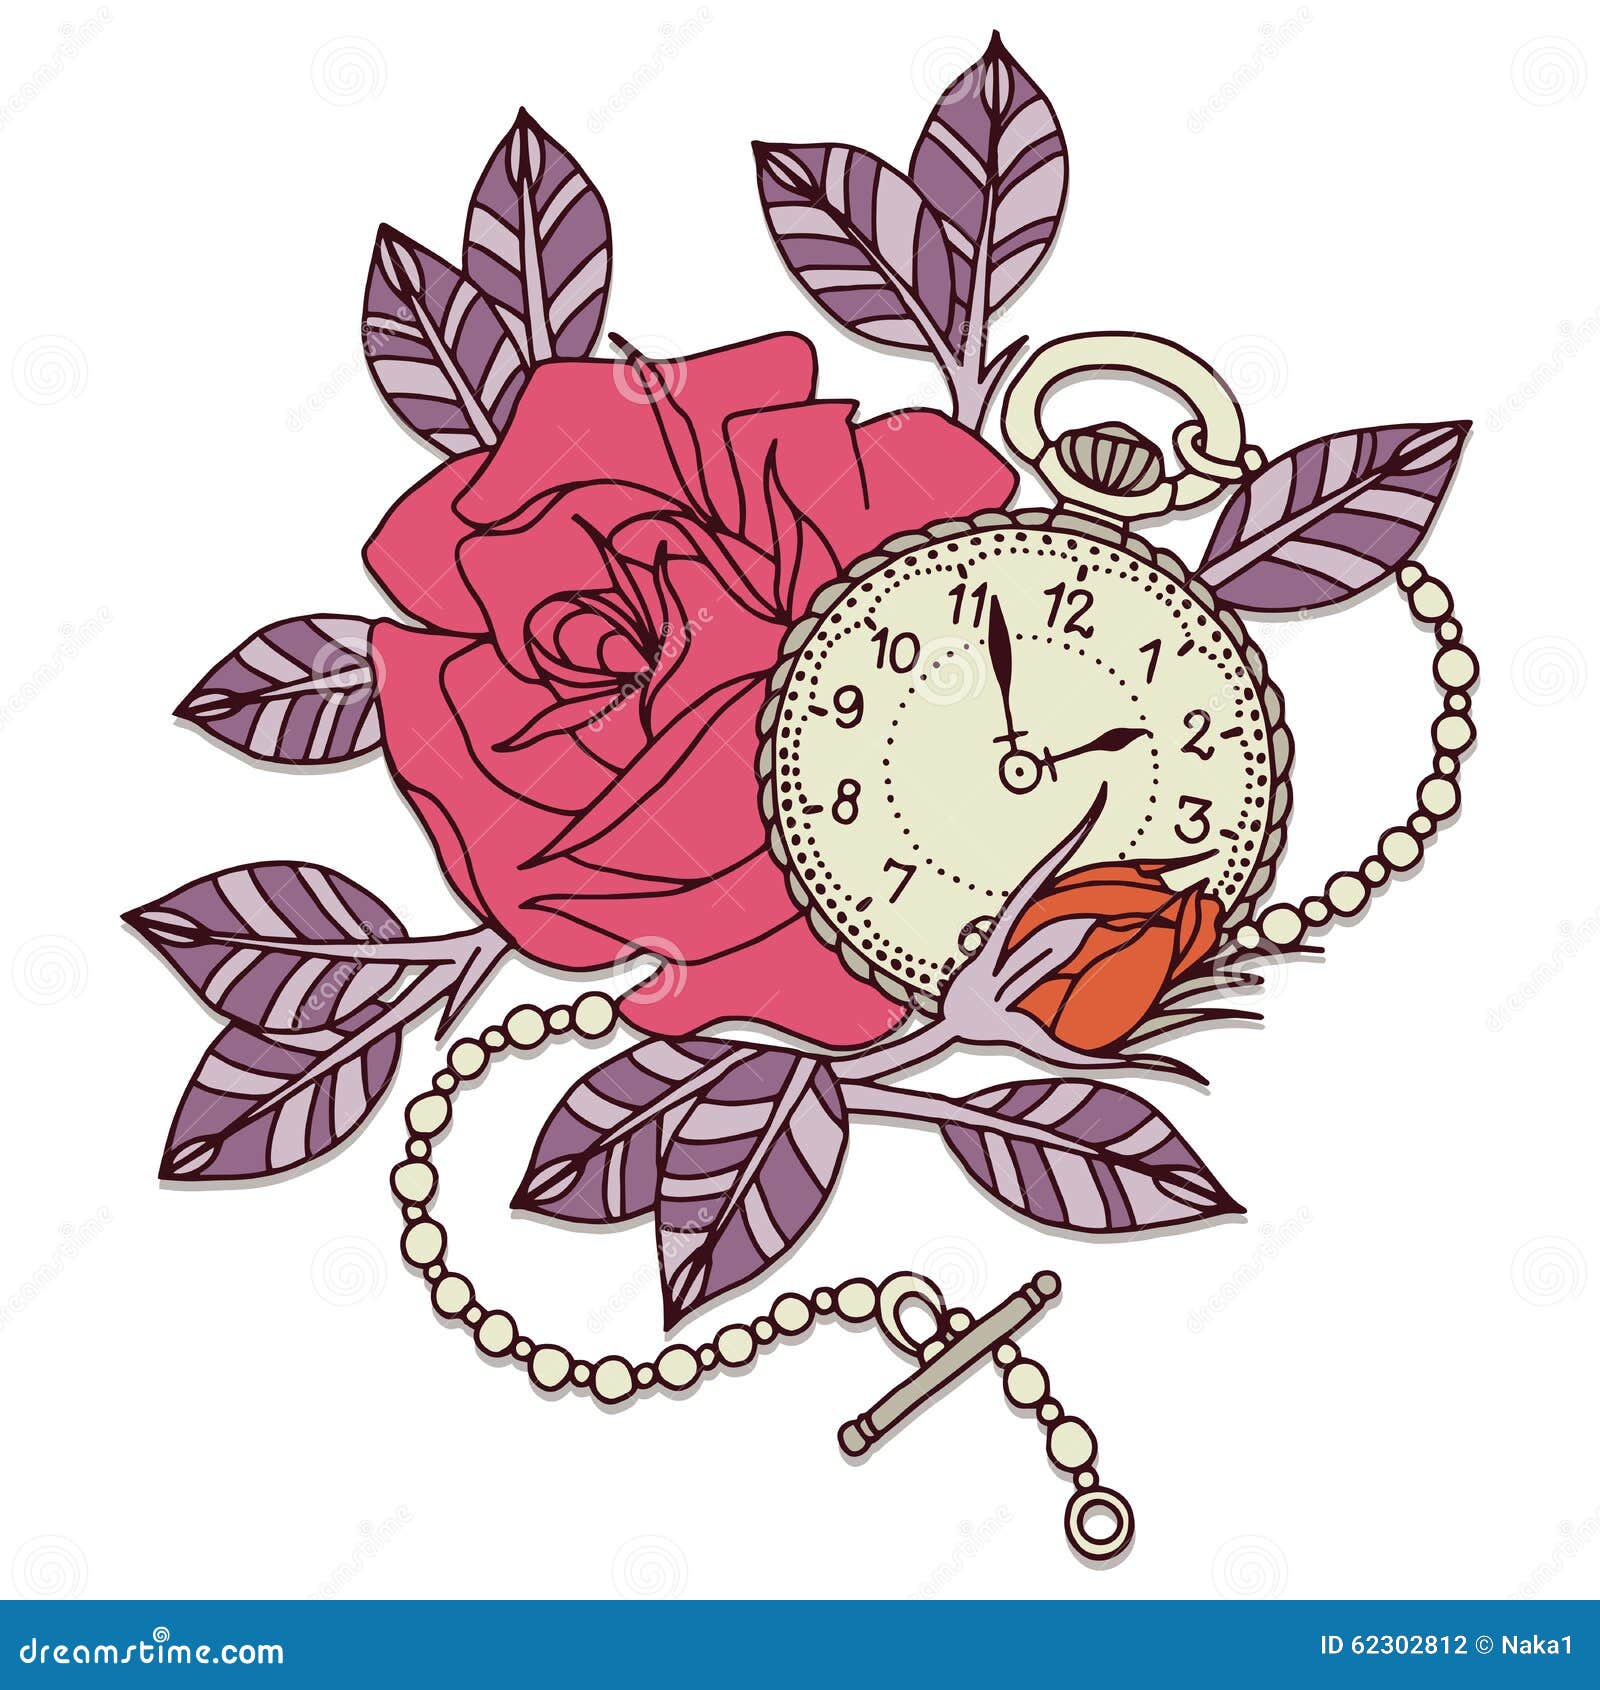 125+ Timeless Pocket Watch Tattoo Ideas - A Classic and Fashionable Totem-anthinhphatland.vn